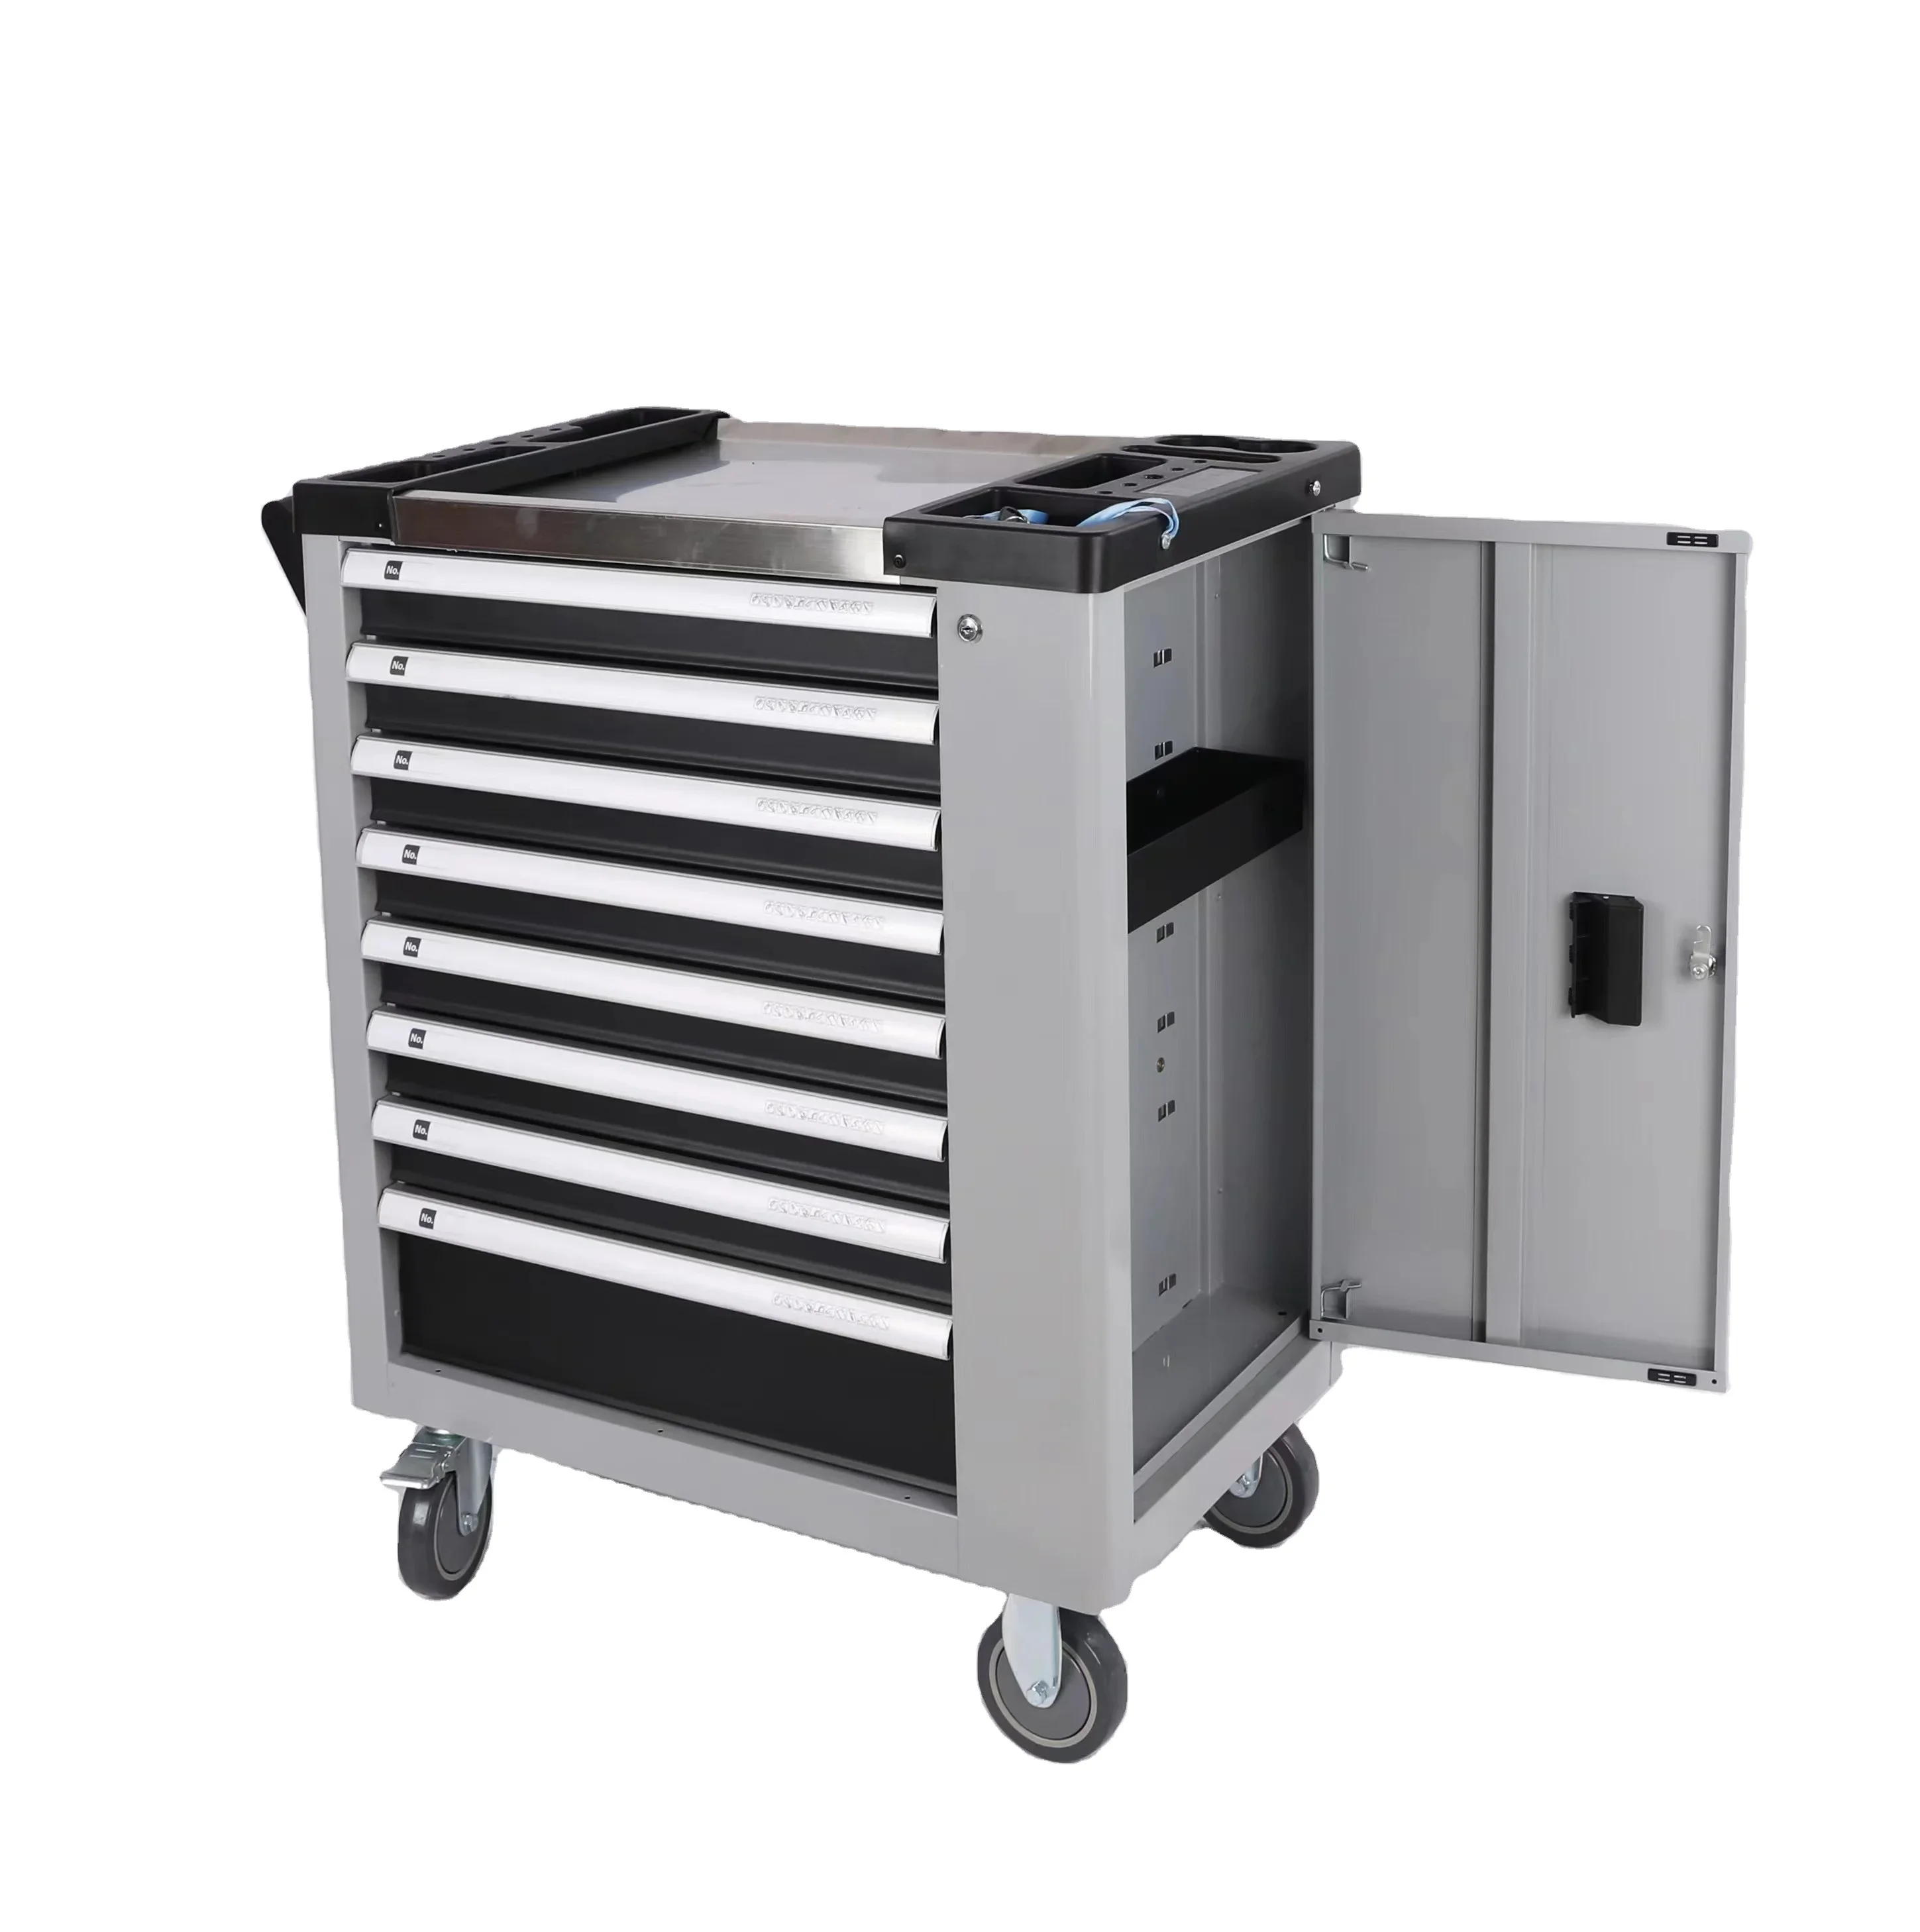 

The new Portable 8 Drawer Mechanic Tool Storage Box Roller Chest Cabinet Trolley With Tools